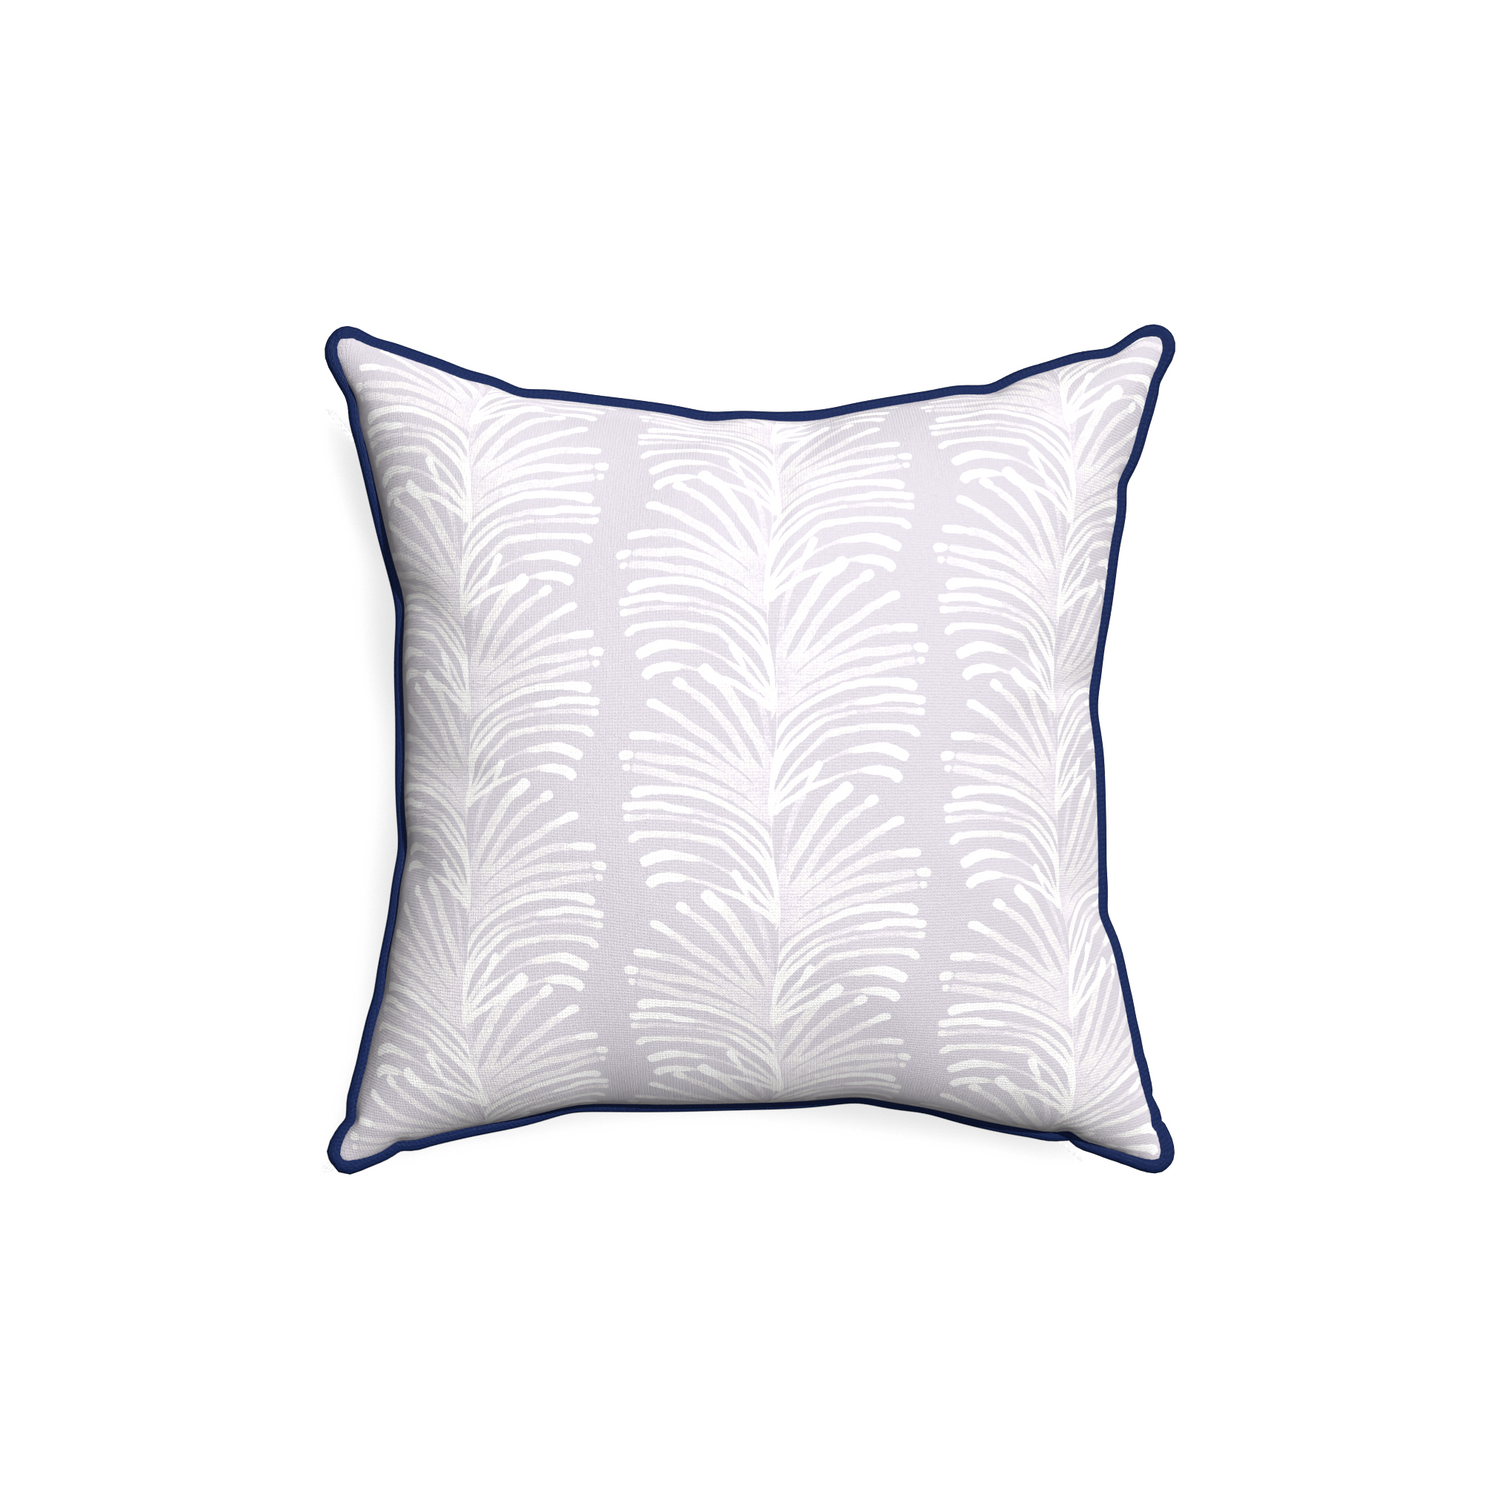 18-square emma lavender custom pillow with midnight piping on white background